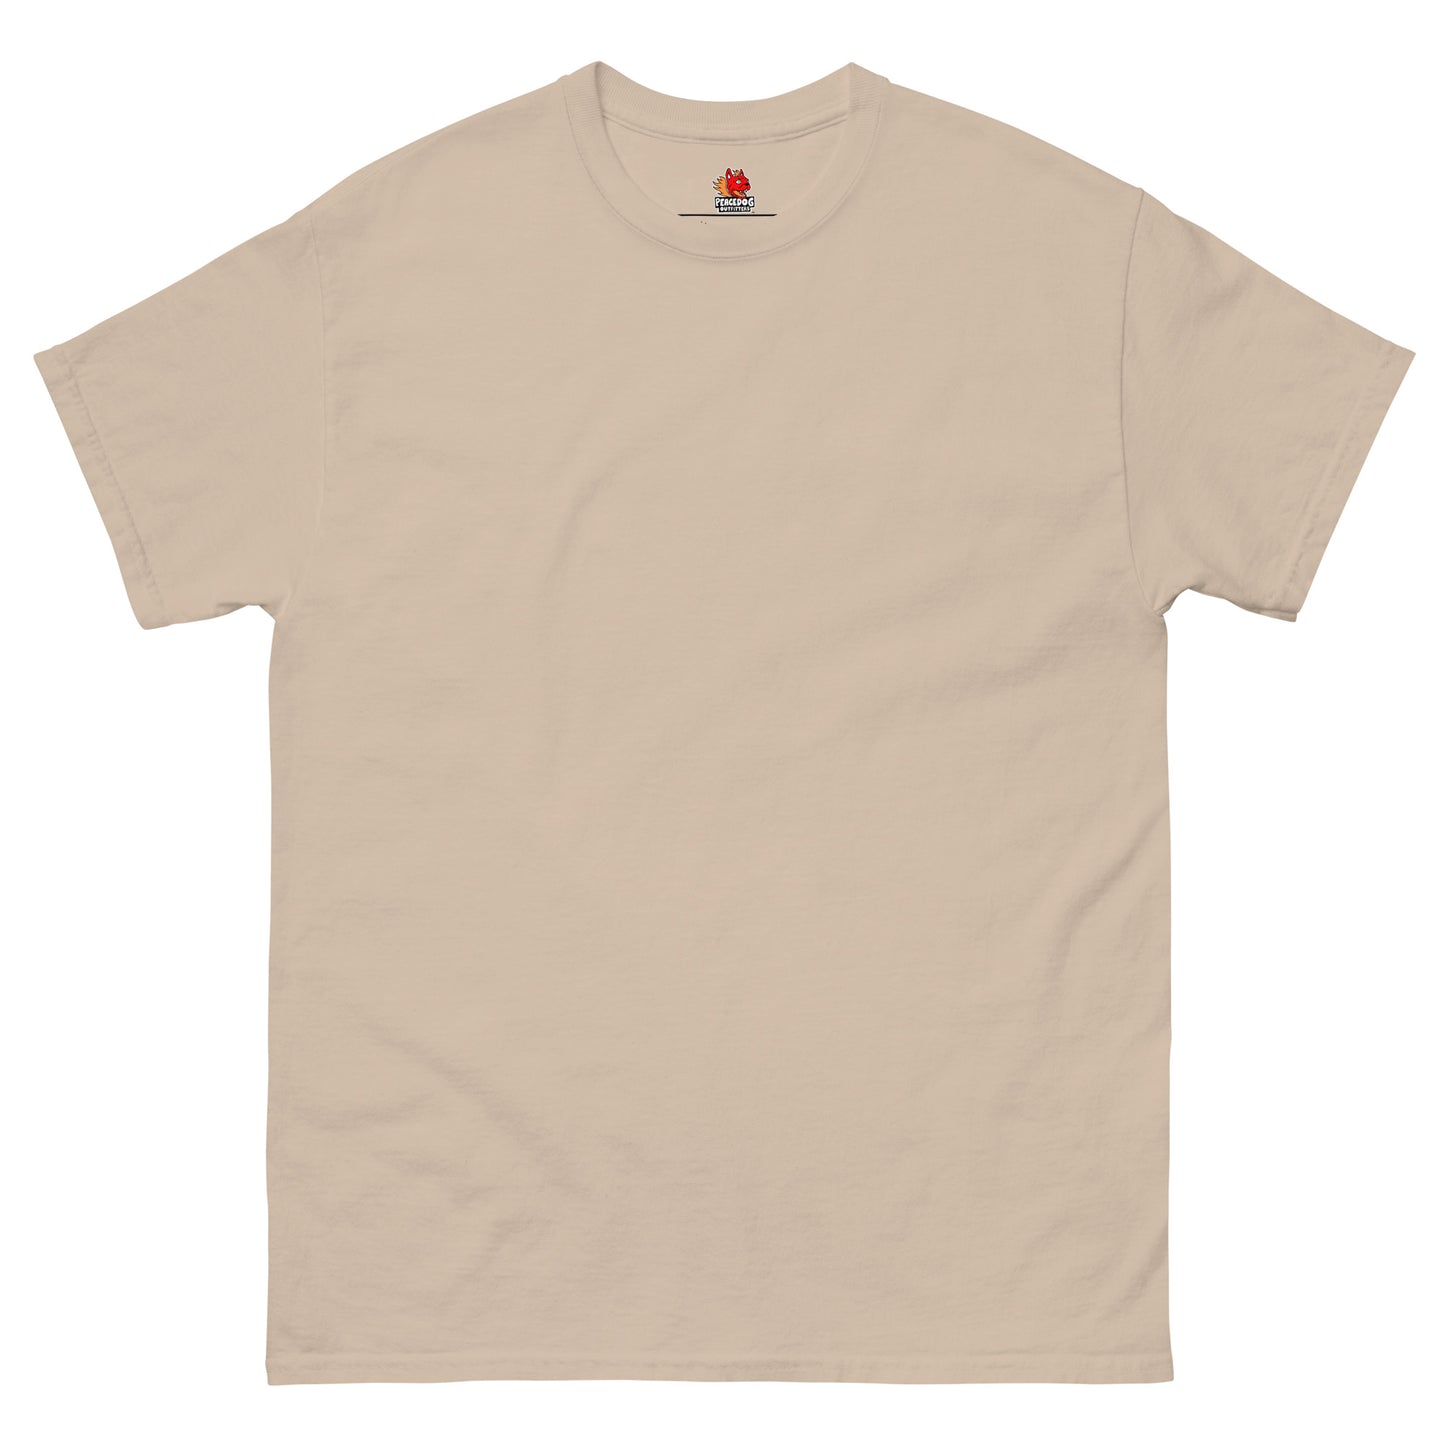 Yellowstone Park Summer Employee classic tee - Grizzly Bear